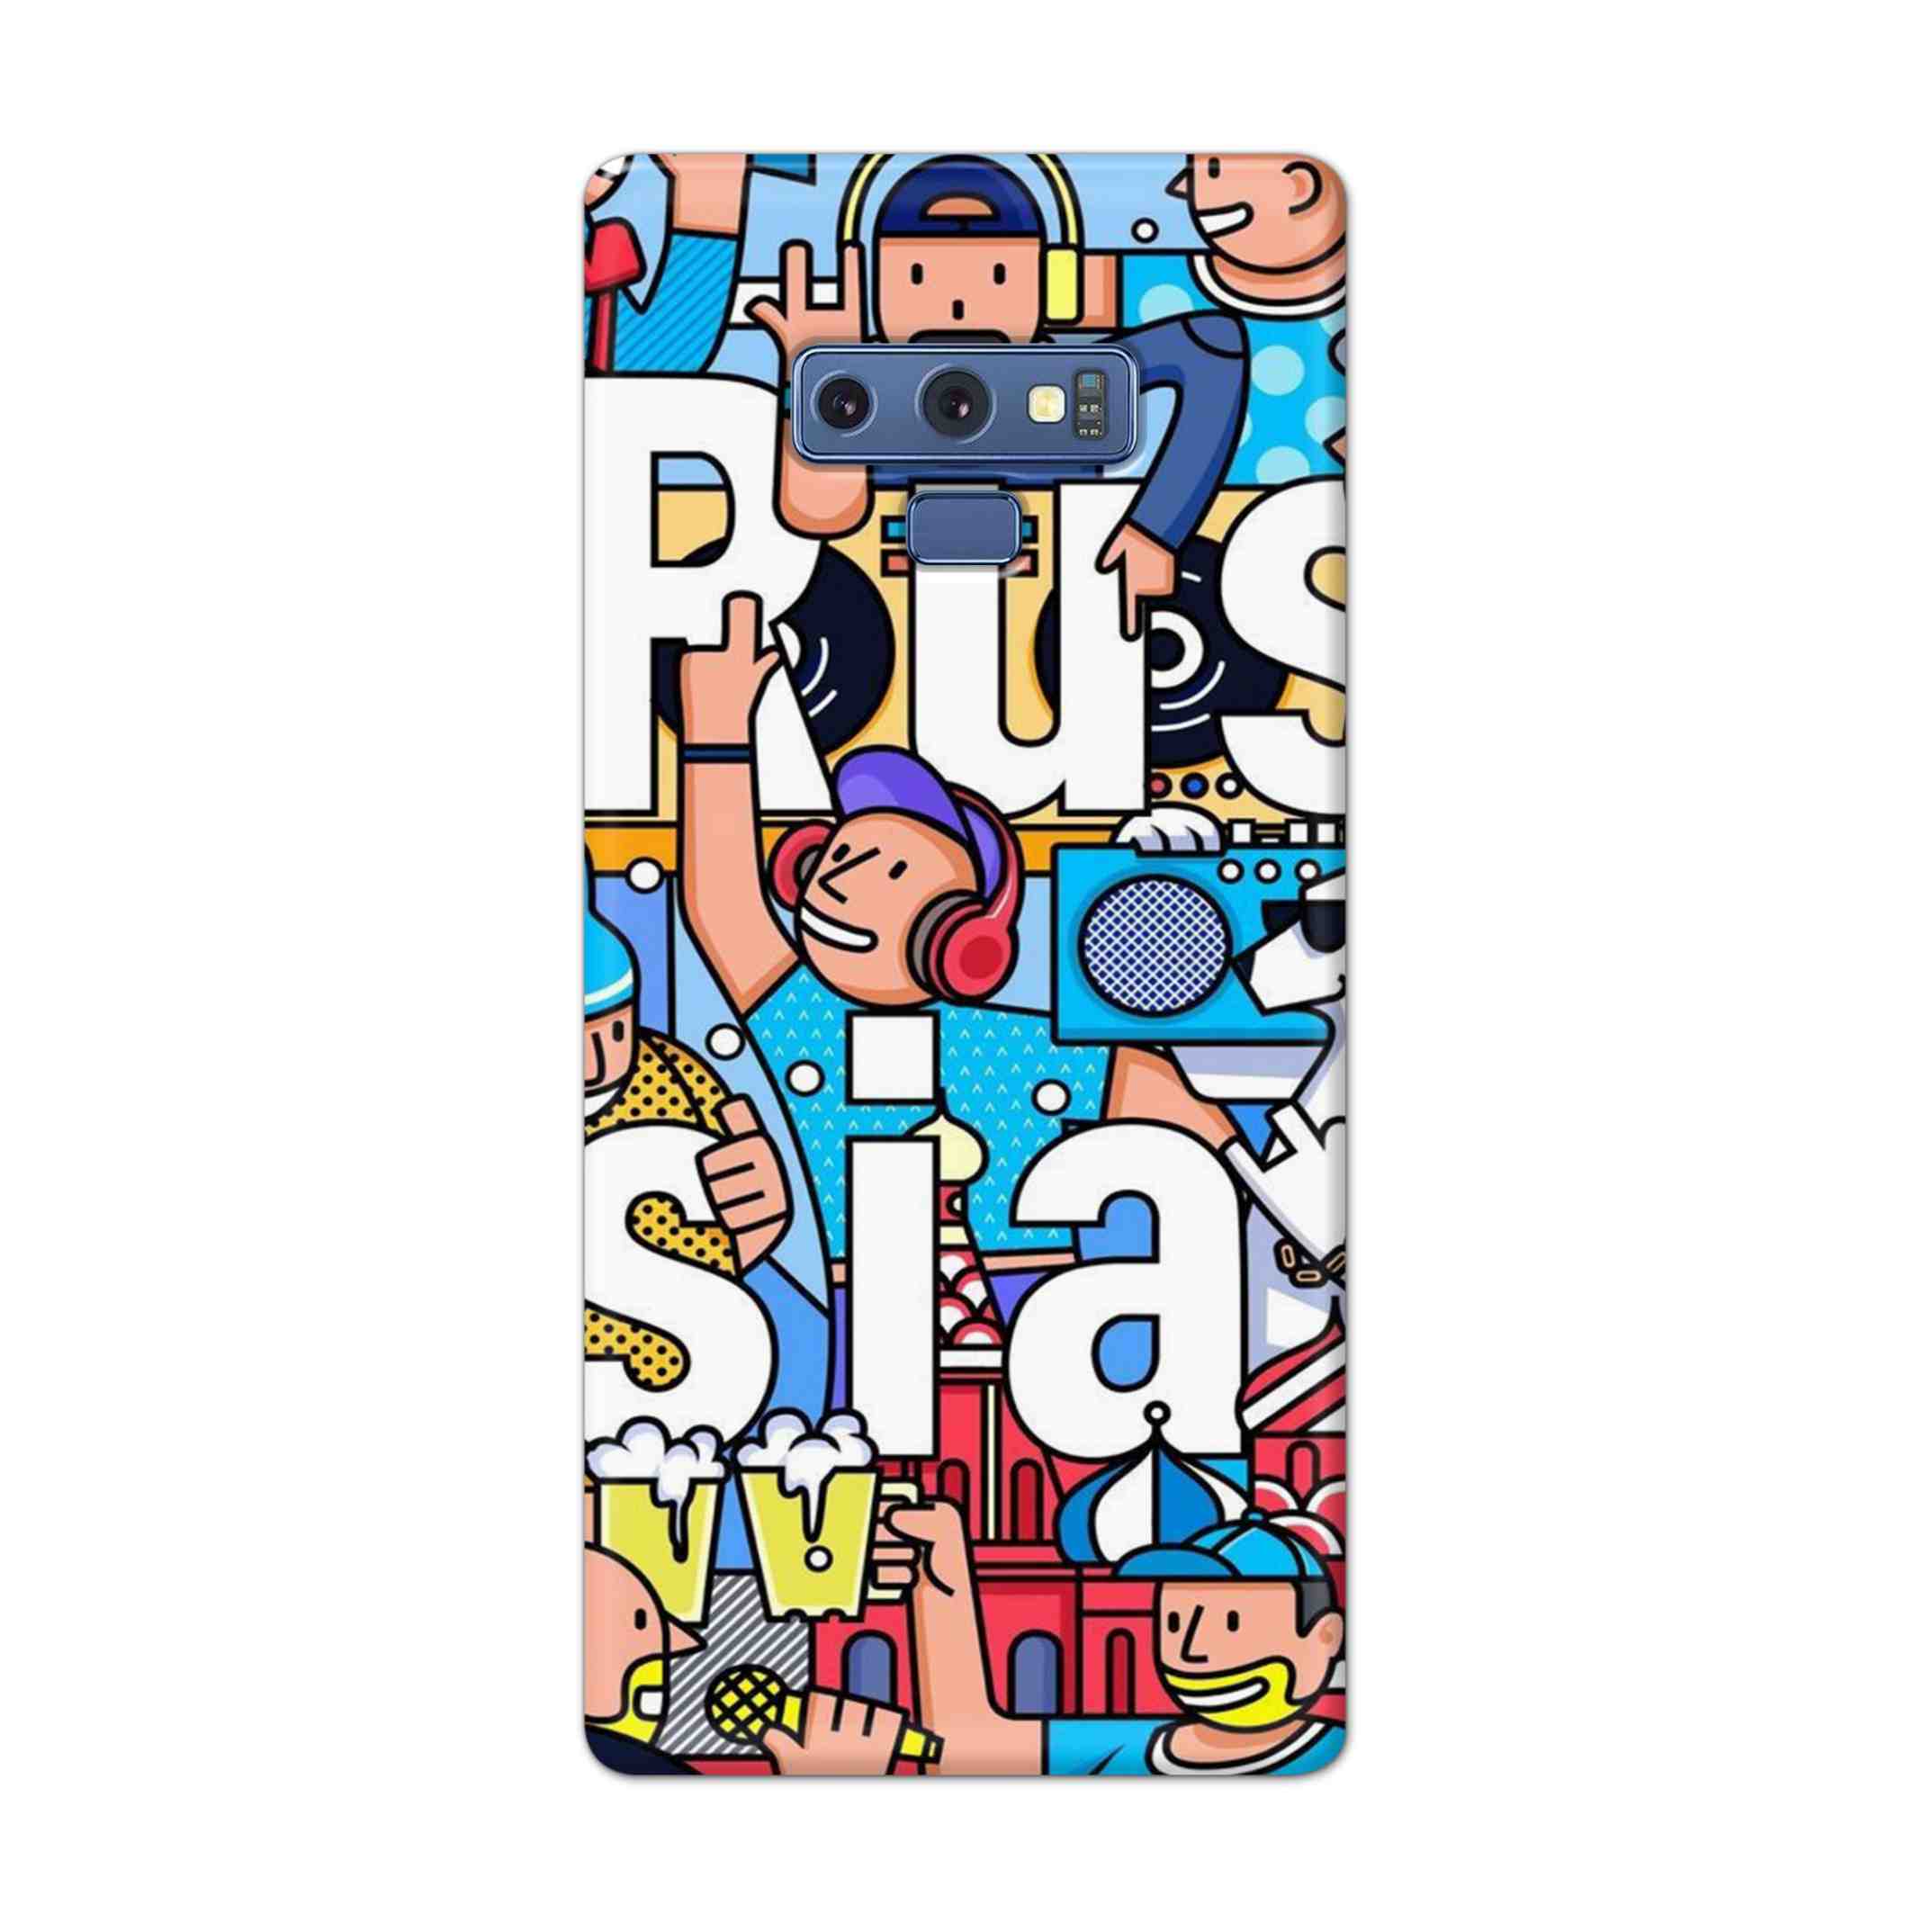 Buy Russia Hard Back Mobile Phone Case Cover For Samsung Galaxy Note 9 Online